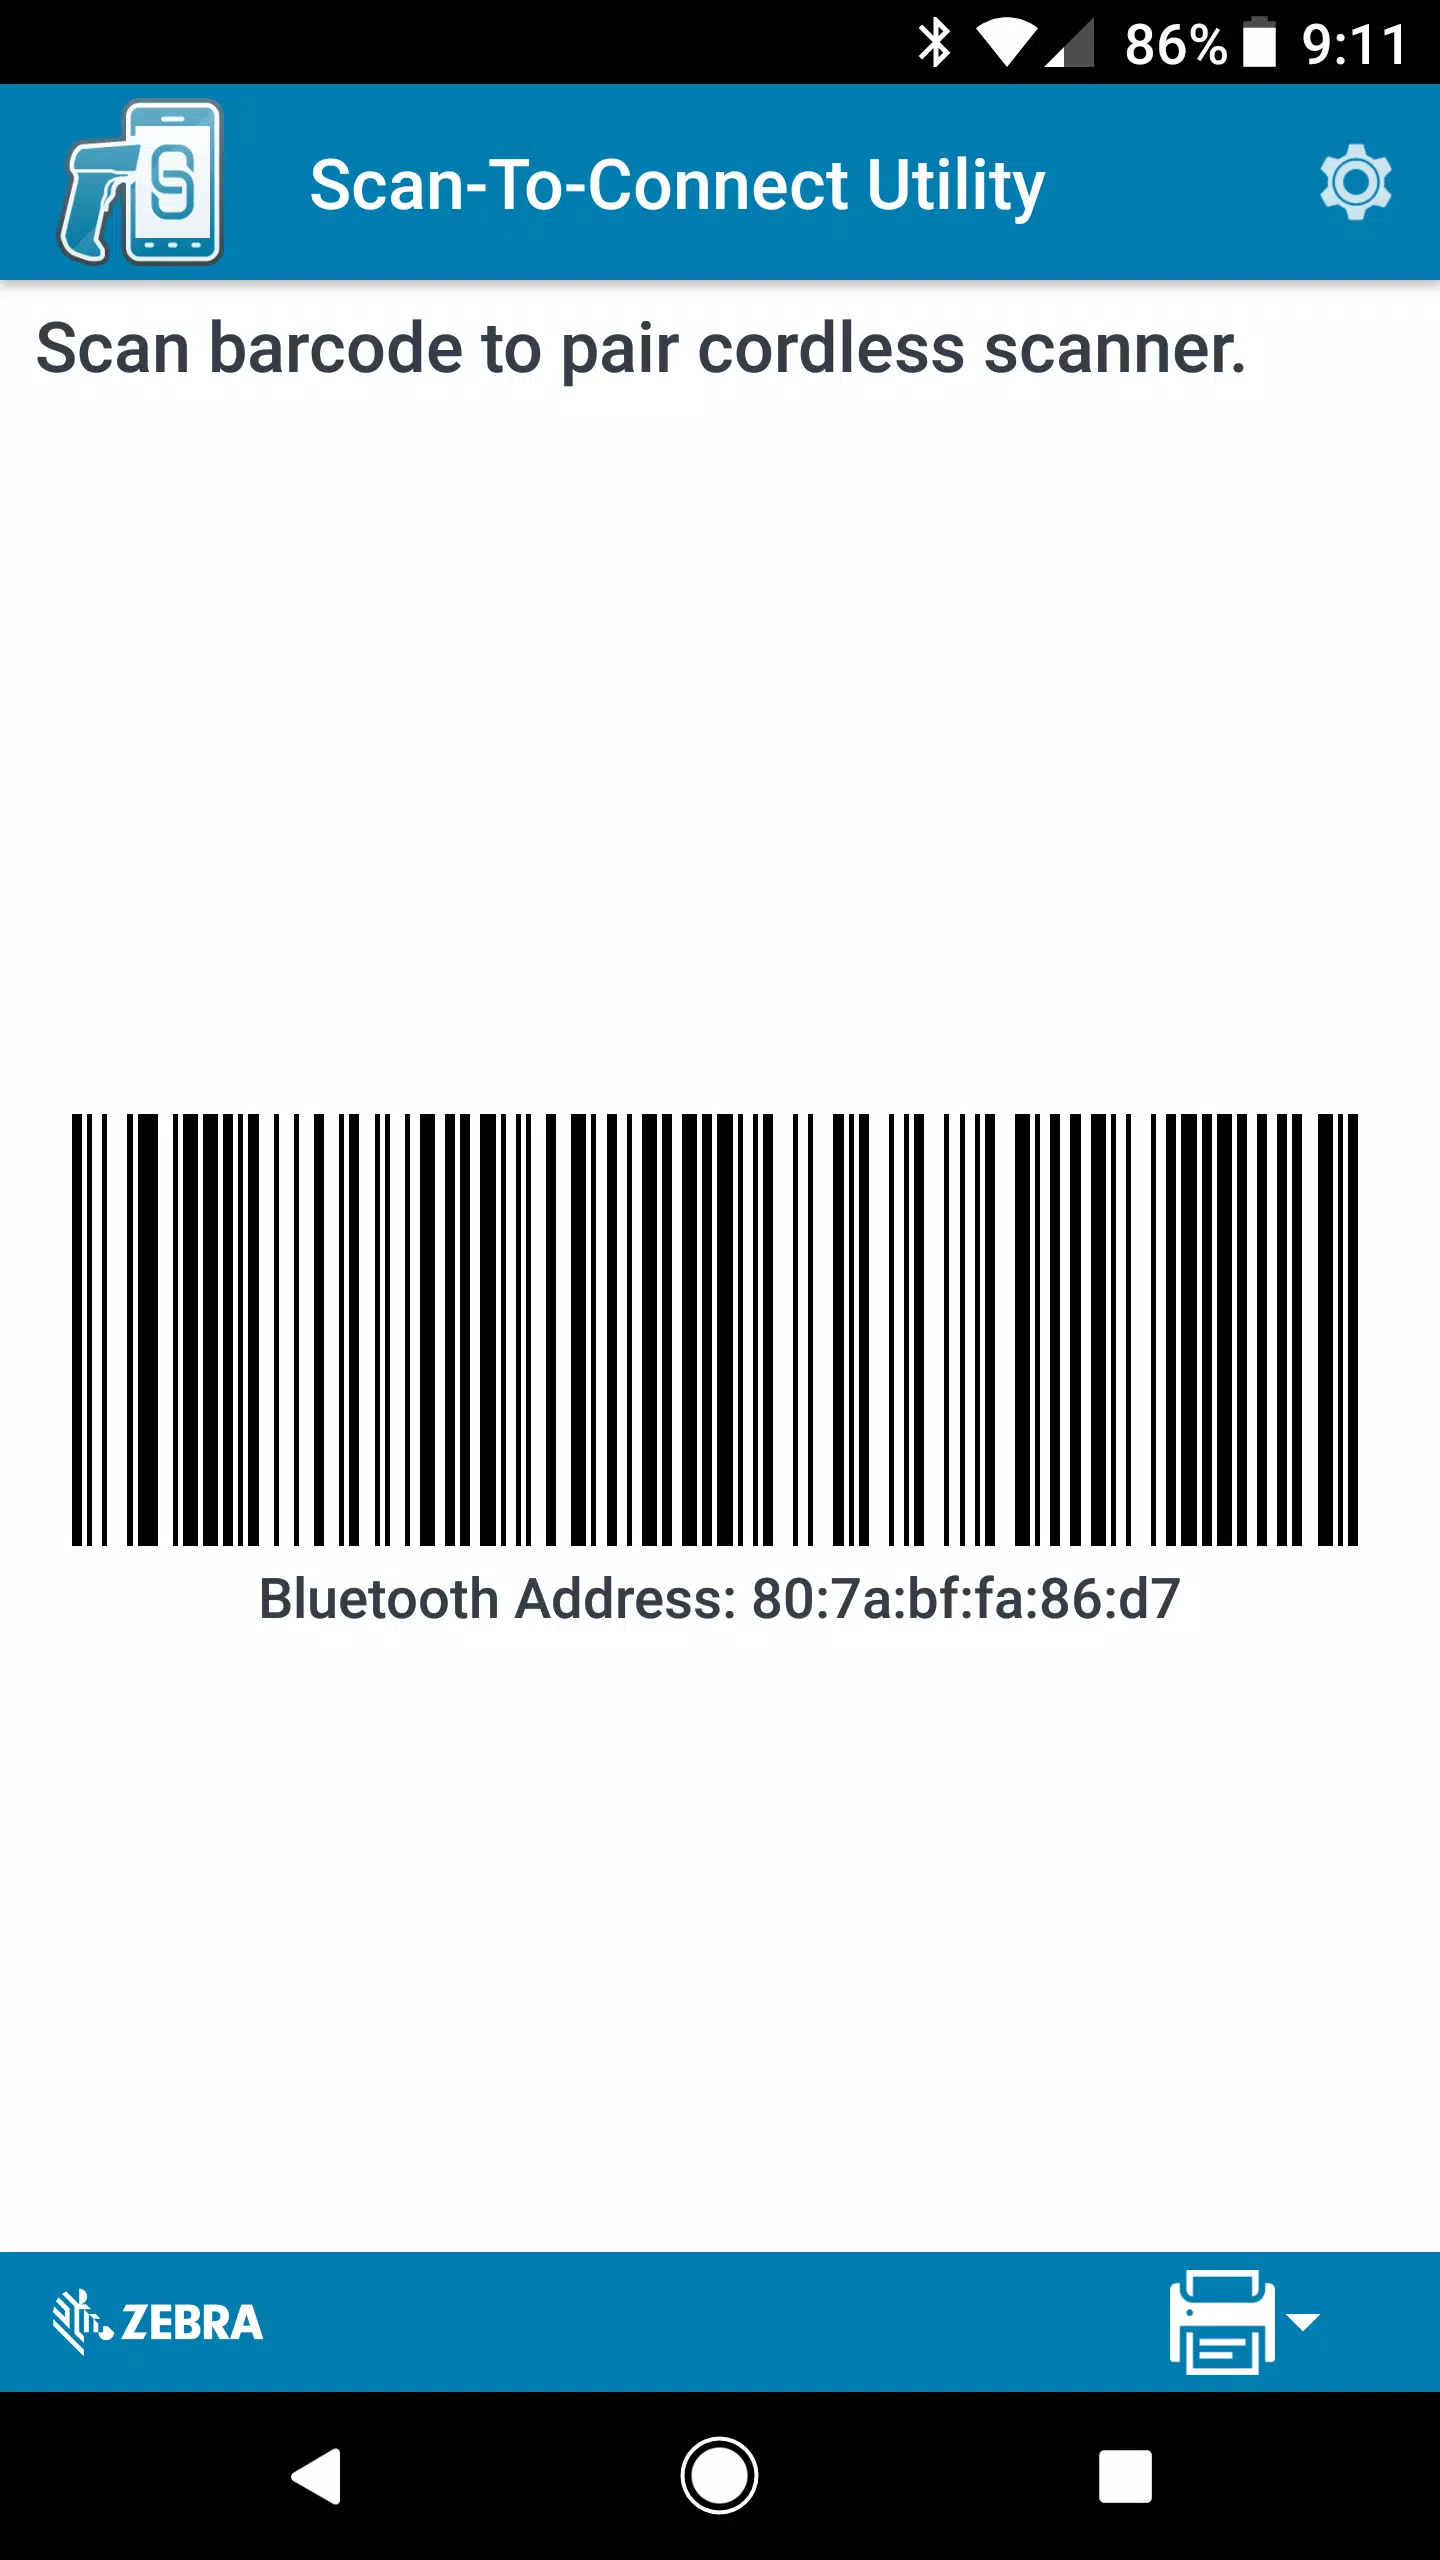 Scan to connect utility adservices apple